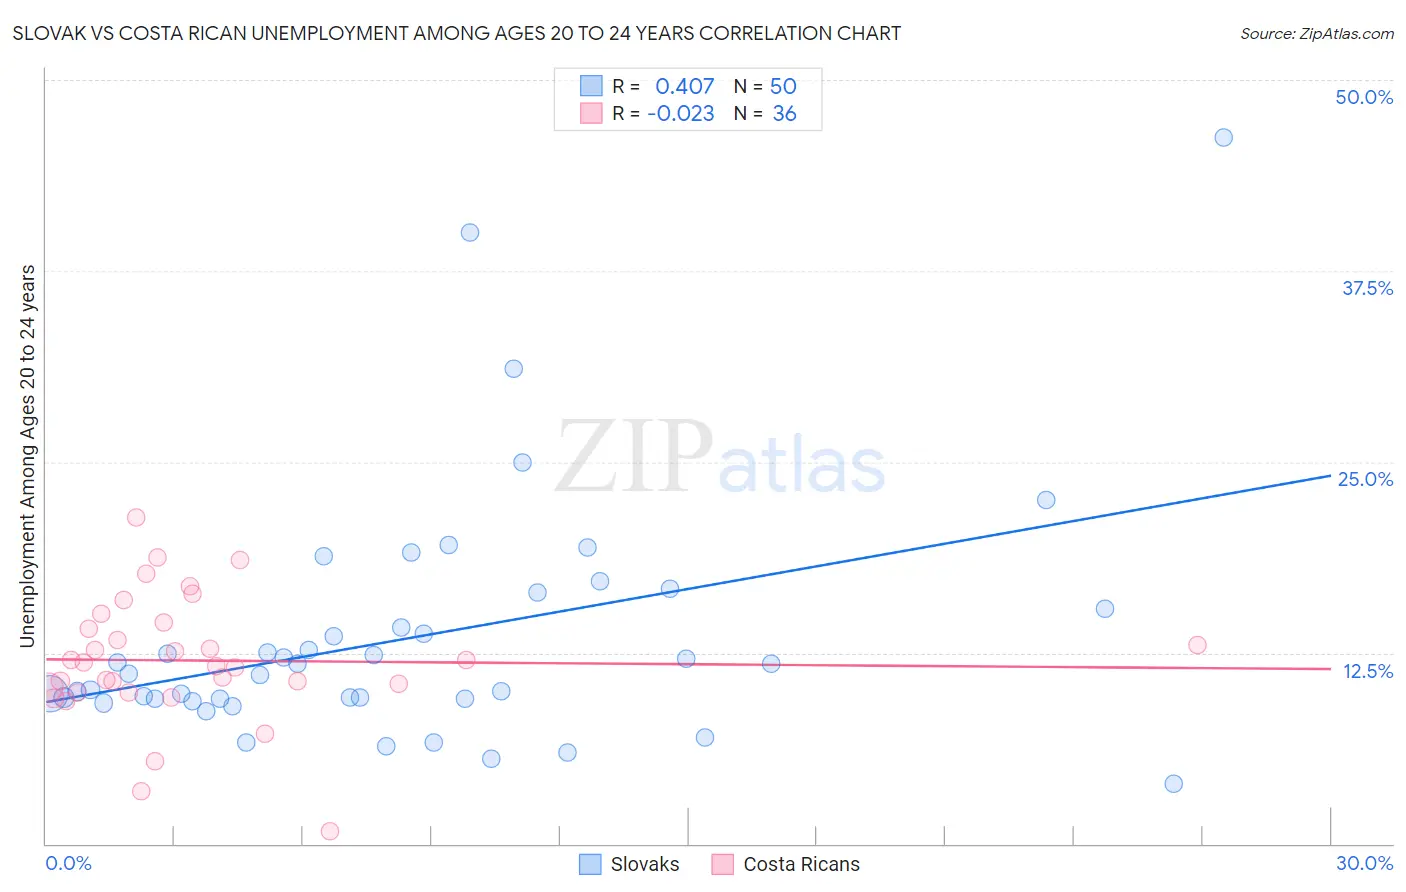 Slovak vs Costa Rican Unemployment Among Ages 20 to 24 years